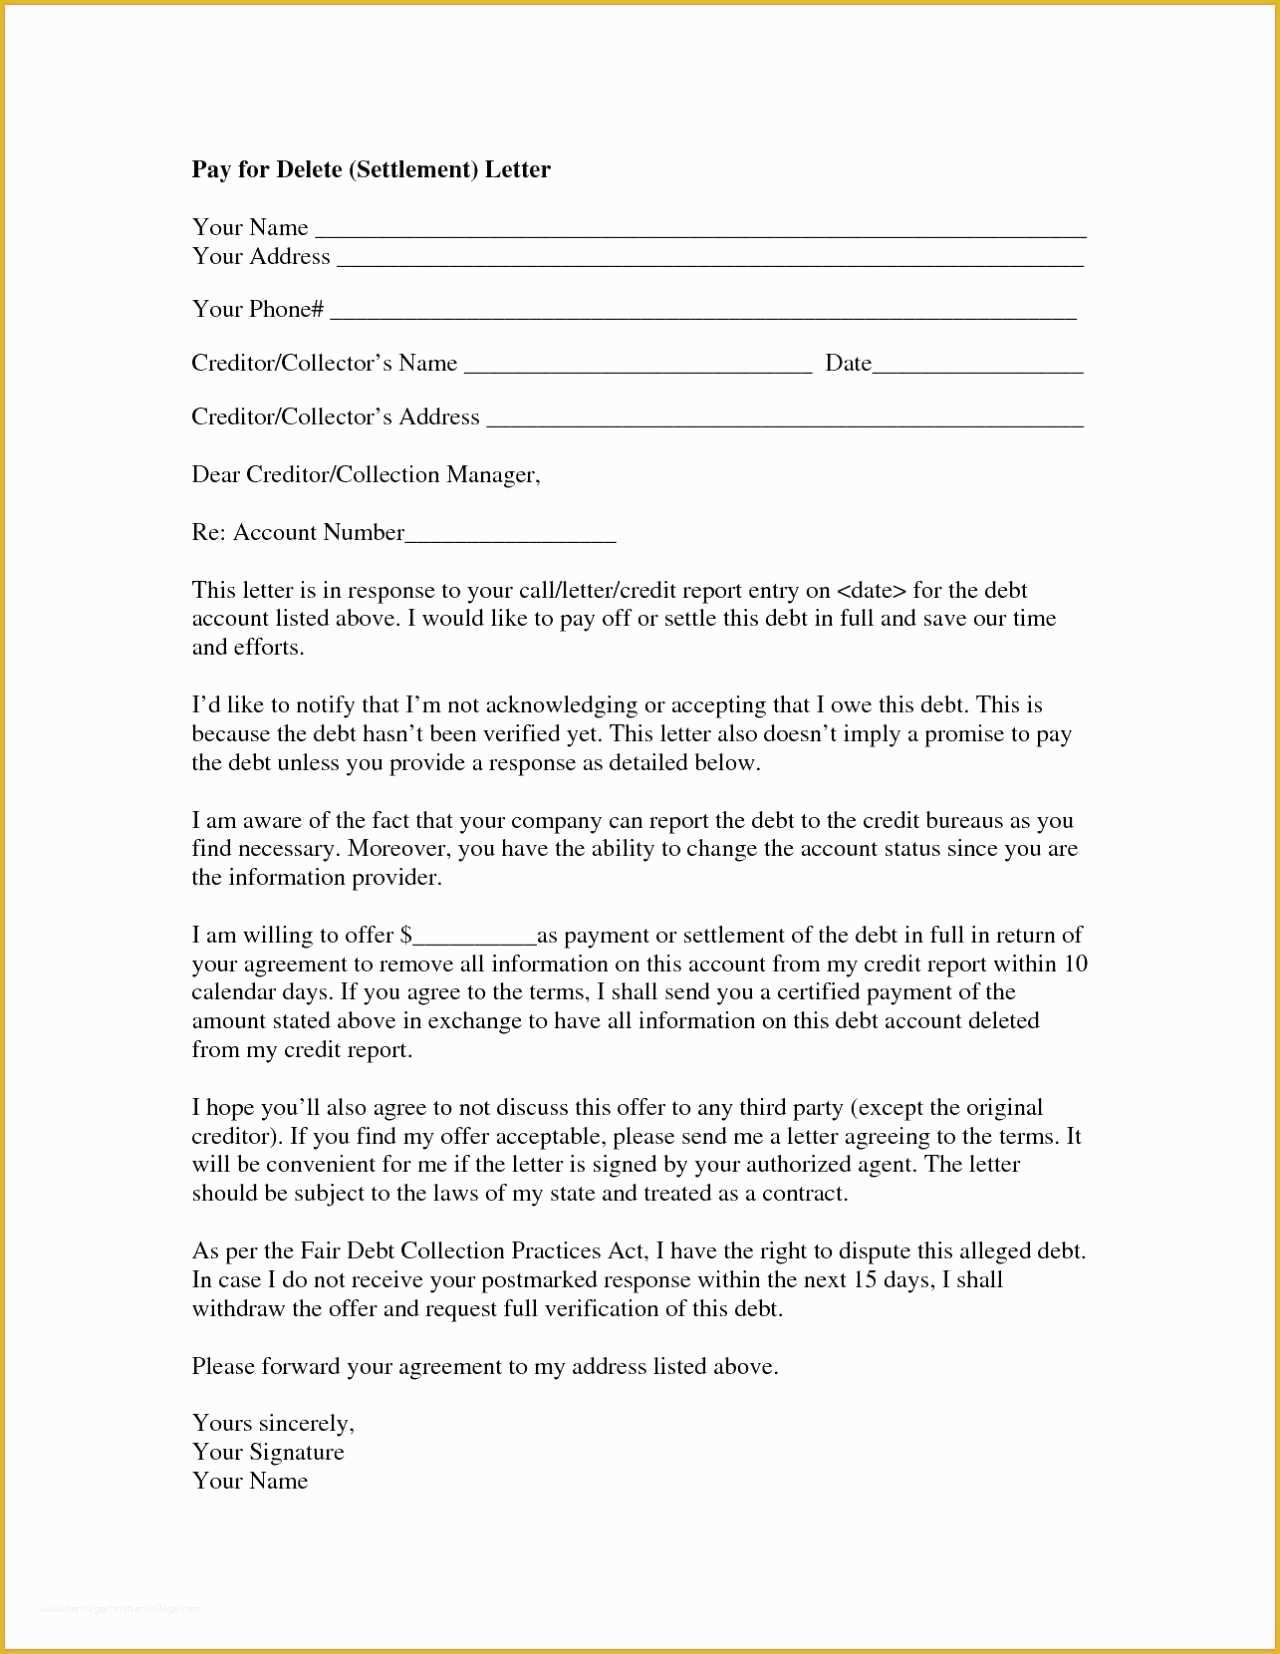 Free 609 Credit Dispute Letter Templates Of Free Section 609 Credit Dispute Letter Template Collection